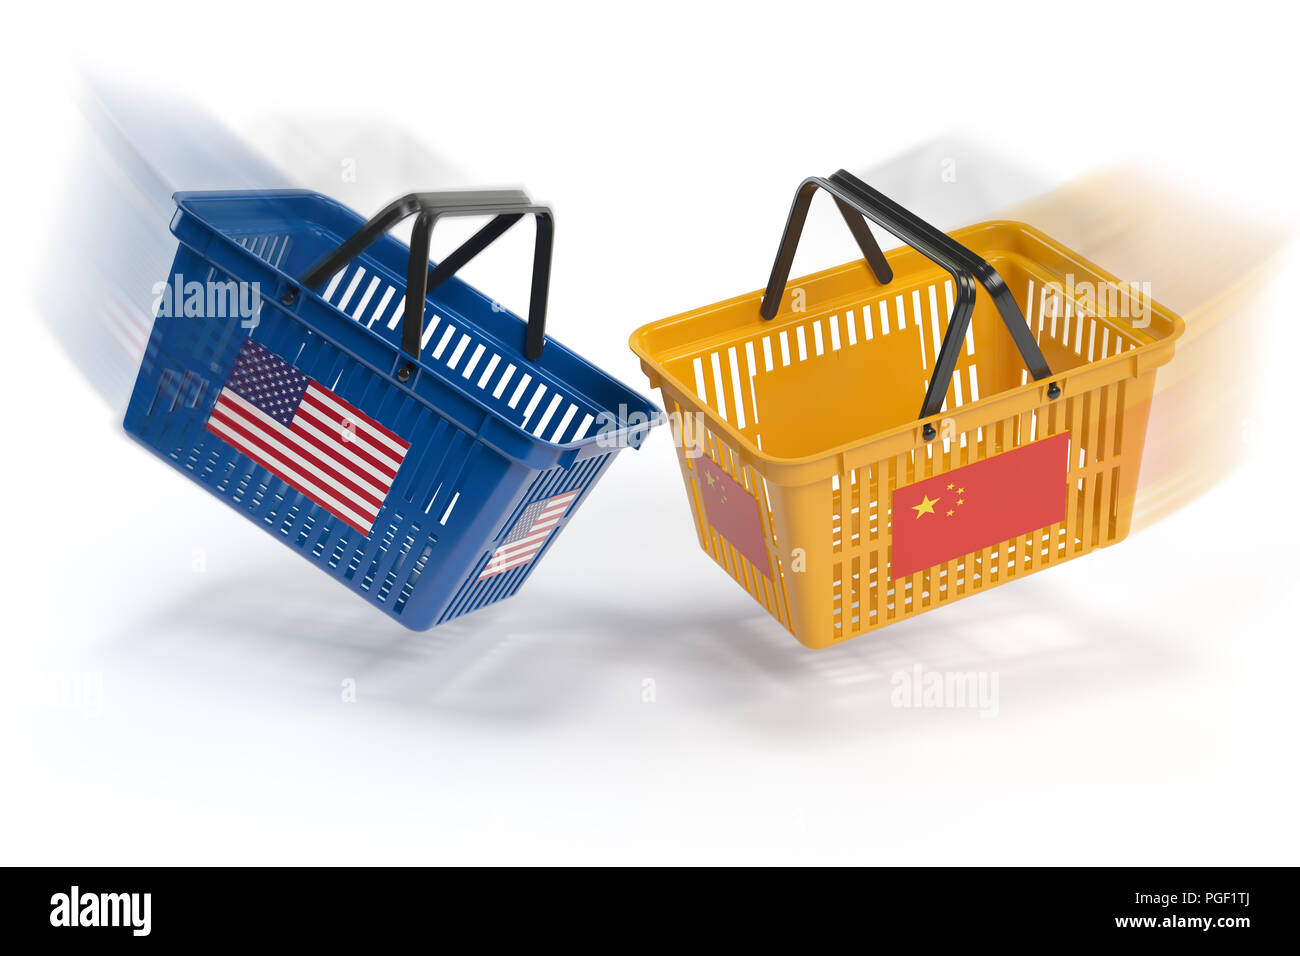 USA China  market conflict.  Economic trade war concept.Two opposing shopping baskets with USA and China flags., 3d illustration Stock Photo